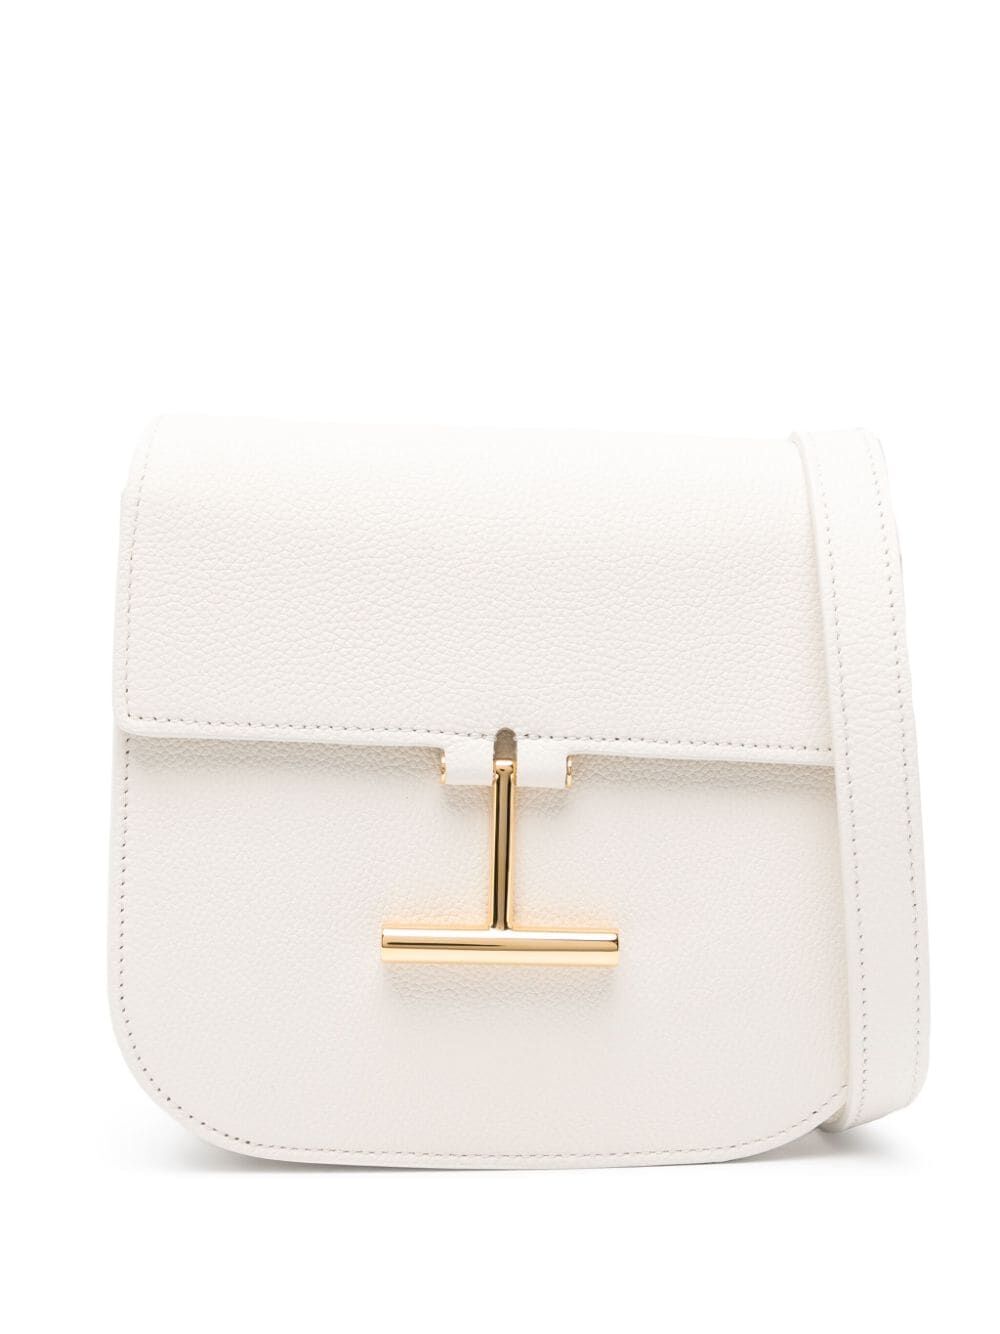 Tom Ford Shoulder And Crossbody Day Bag In White